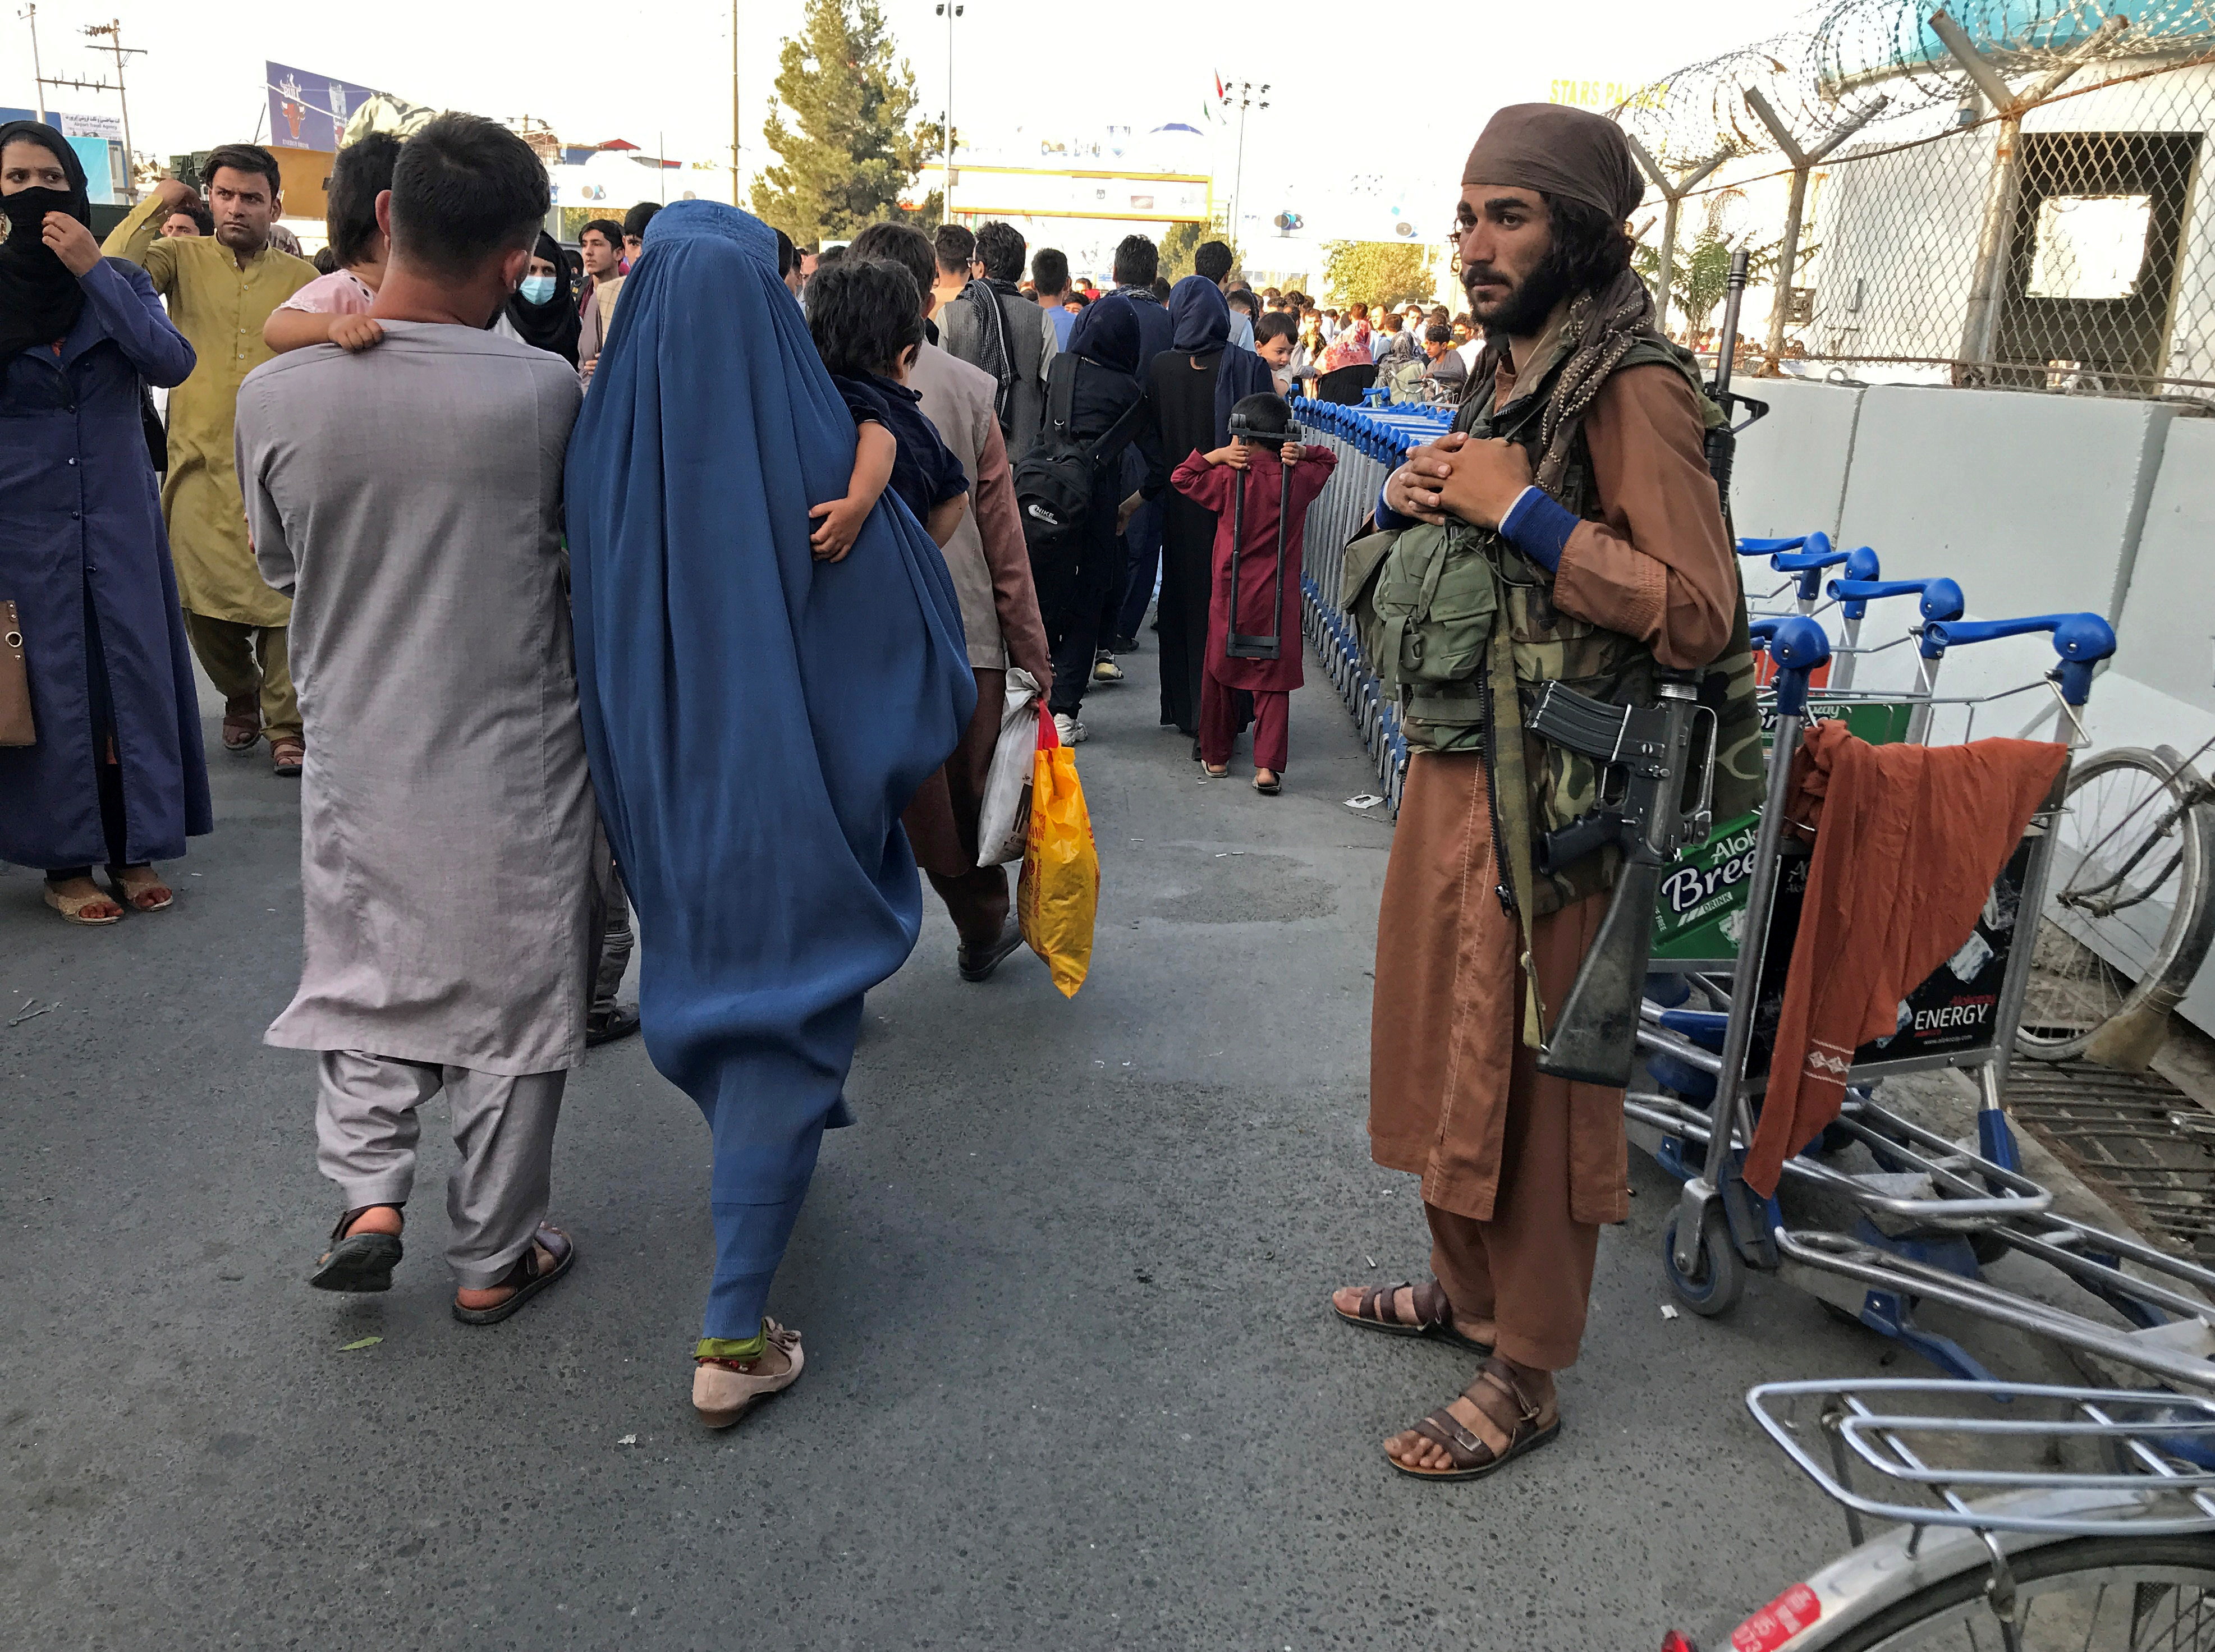 A member of Taliban stands guard as people walk at the entrance gate of Hamid Karzai International Airport in Kabul